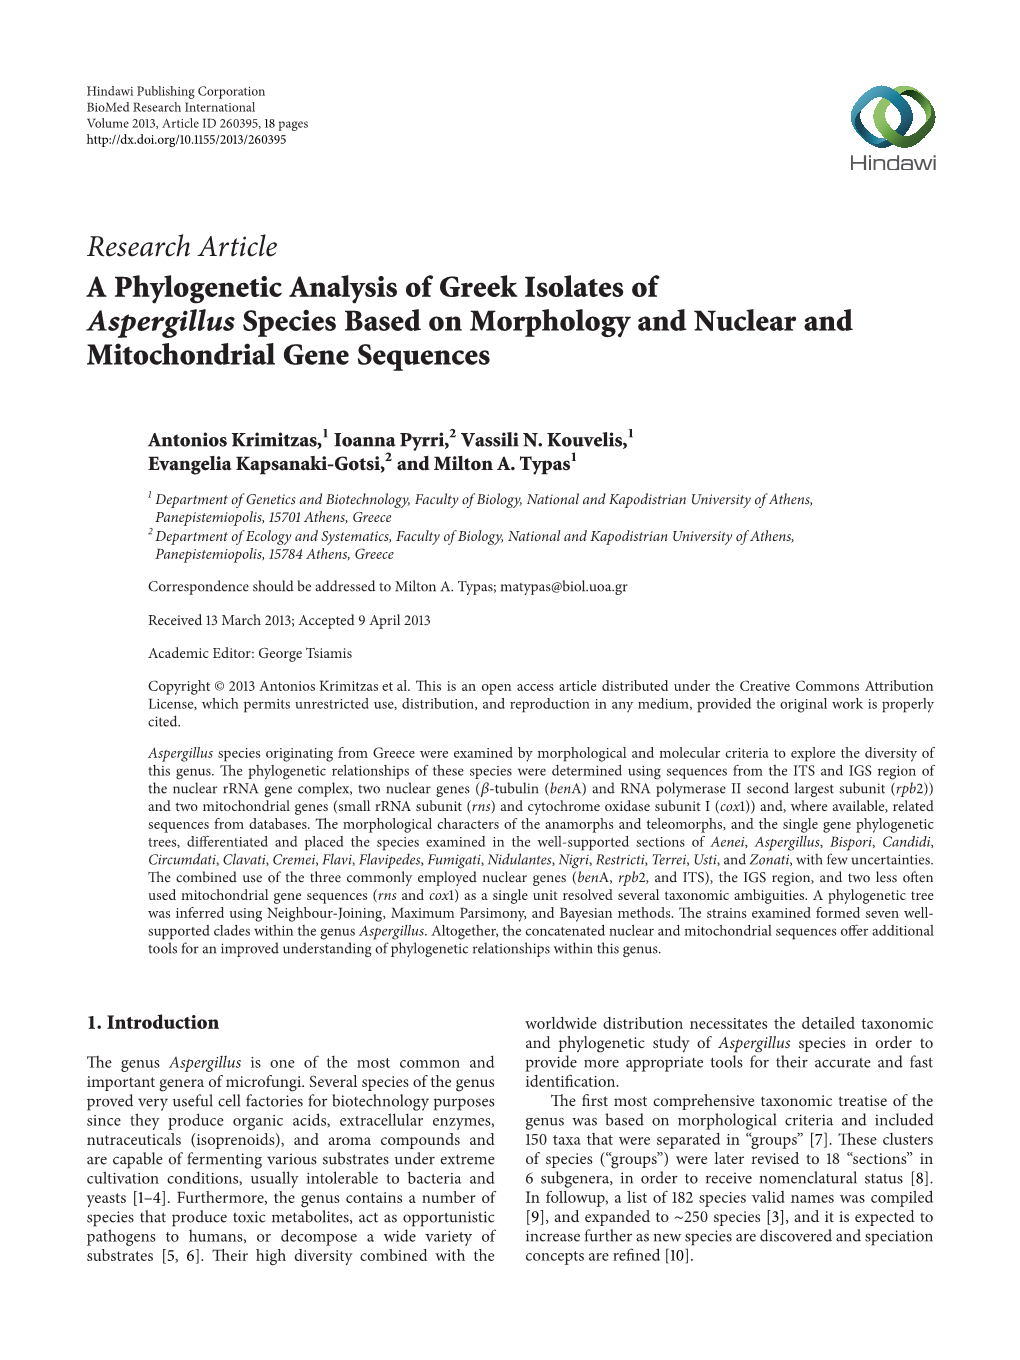 A Phylogenetic Analysis of Greek Isolates of Aspergillus Species Based on Morphology and Nuclear and Mitochondrial Gene Sequences